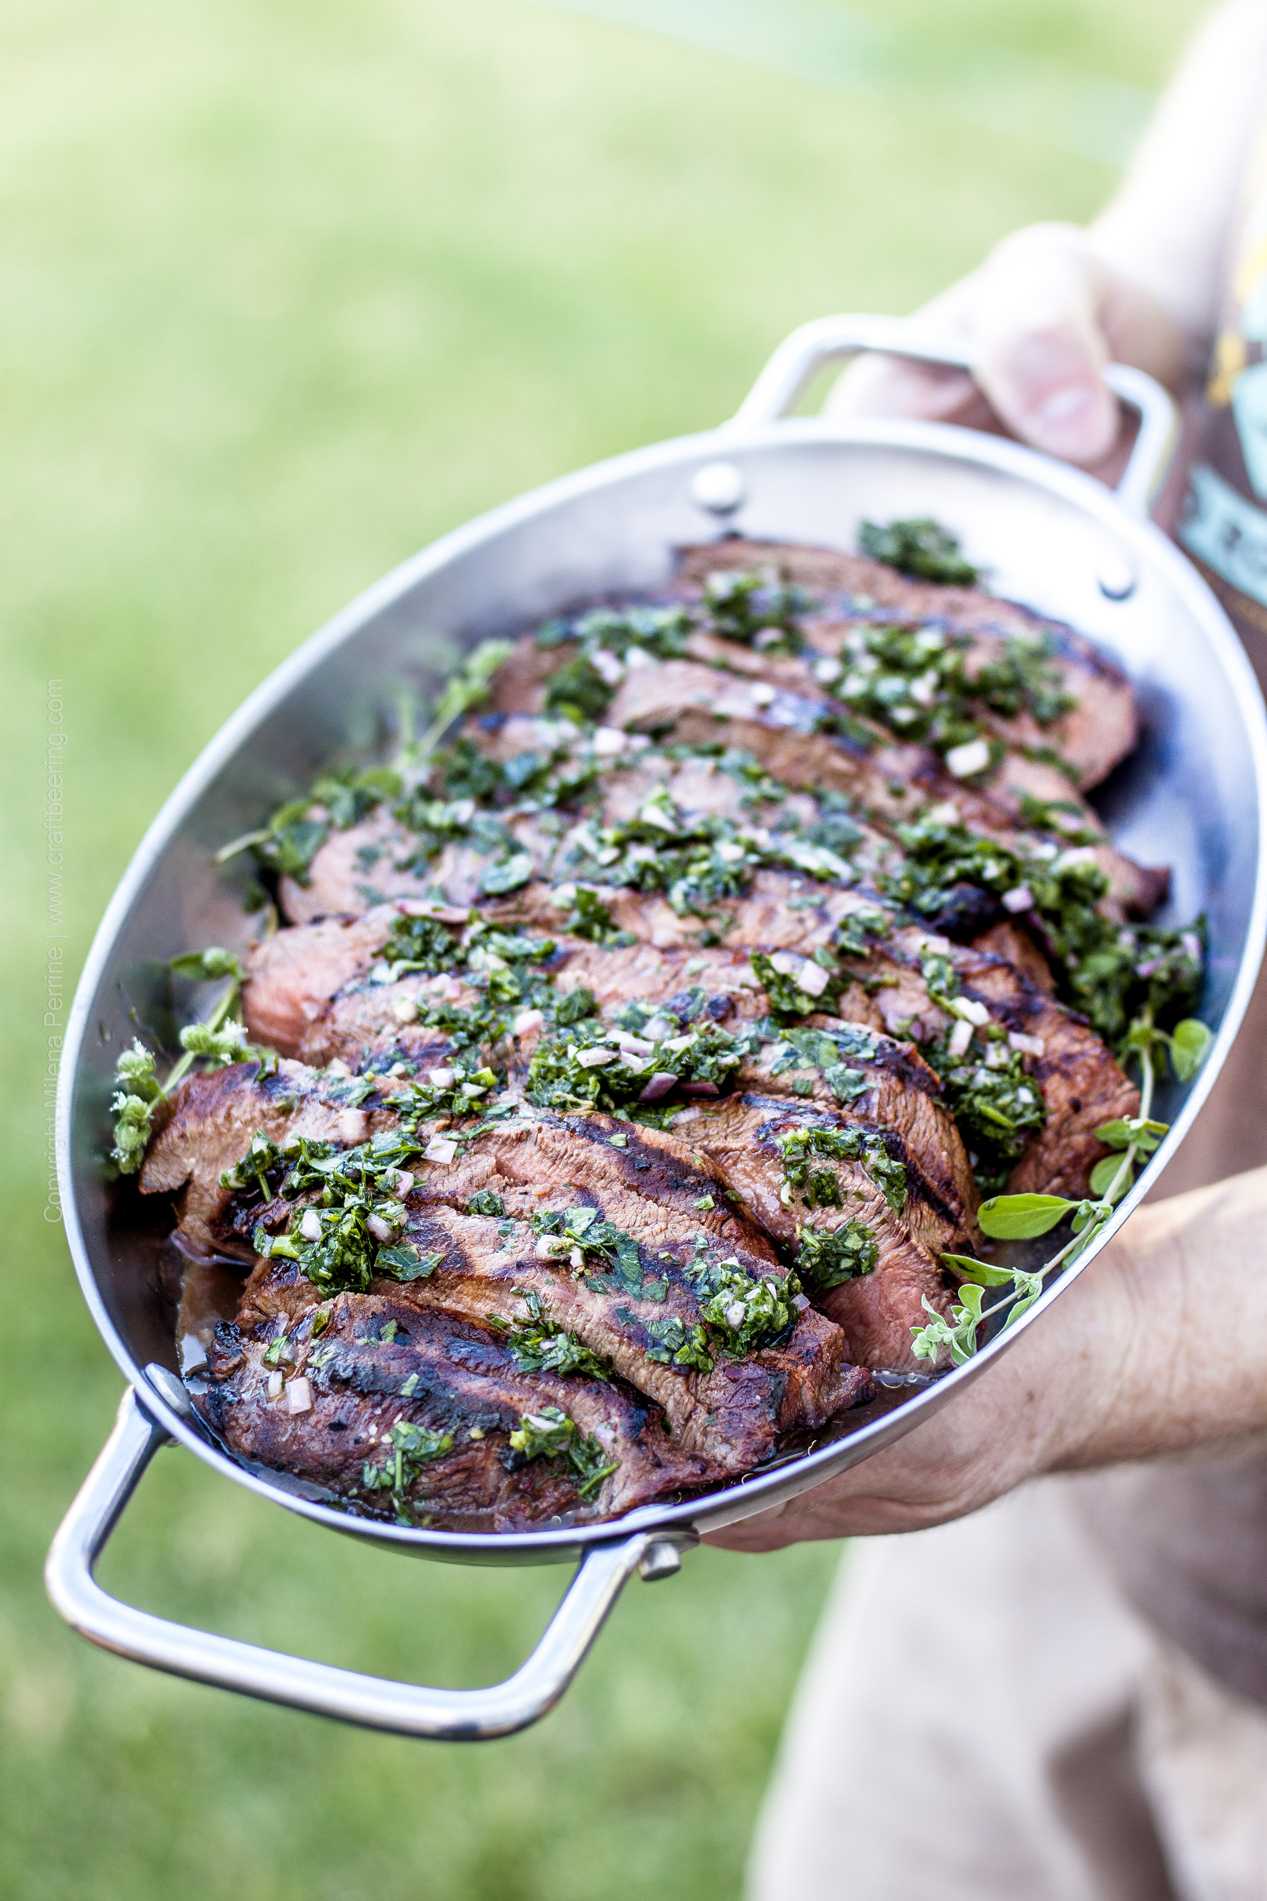 Marinade for steak with beer imparts deep flavors to a flank steak.